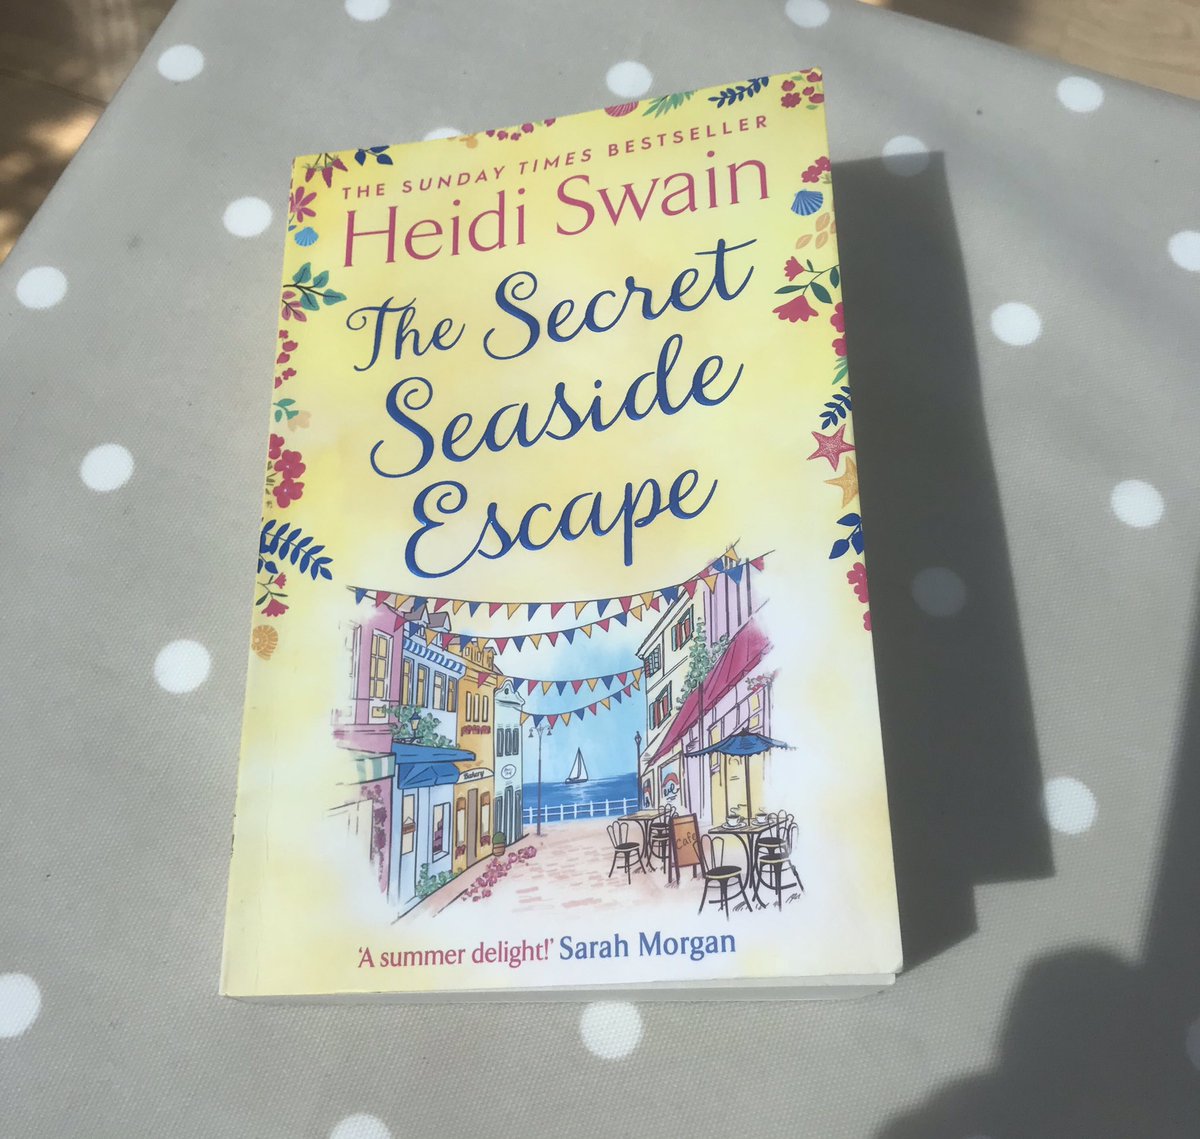 Another cracker of a book @Heidi_Swain, thank you! Lovely to get away from lockdown reality and escape to Wynmouth for a few hours. Looking forward to October for release of The Winter Garden. Hope you’ve got lots more books in the pipeline?! #TheSecretSeasideEscape 🤞📚